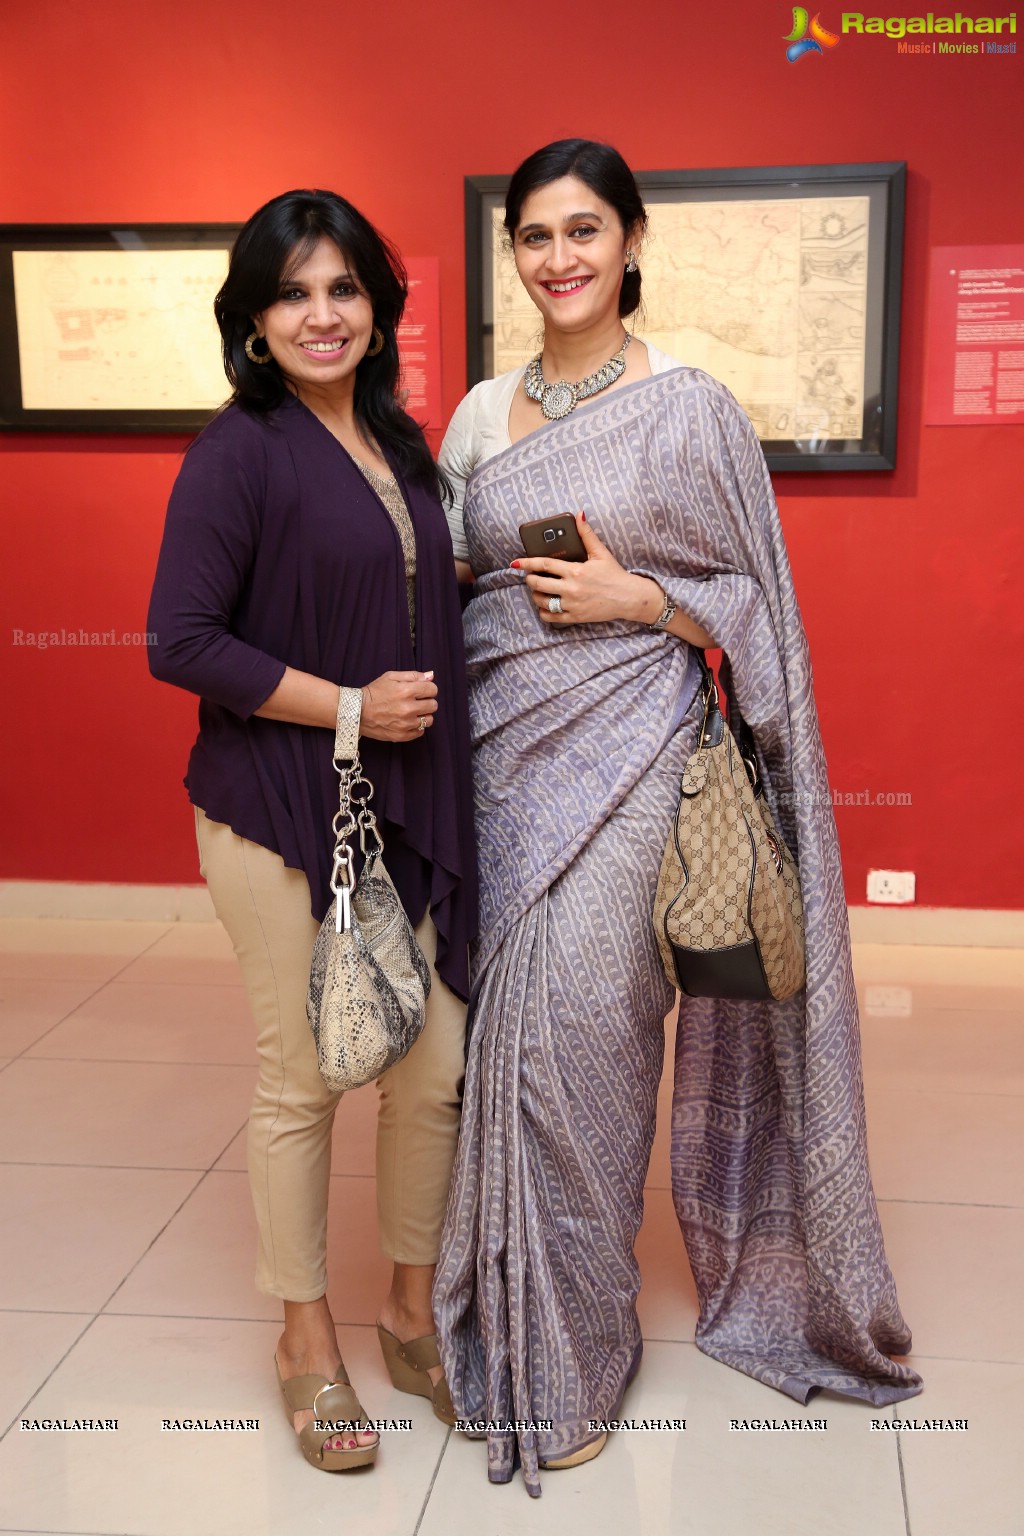 The Preview of the Exhibitions by Telangana Tourism at Telangana State Gallery of Fine Art